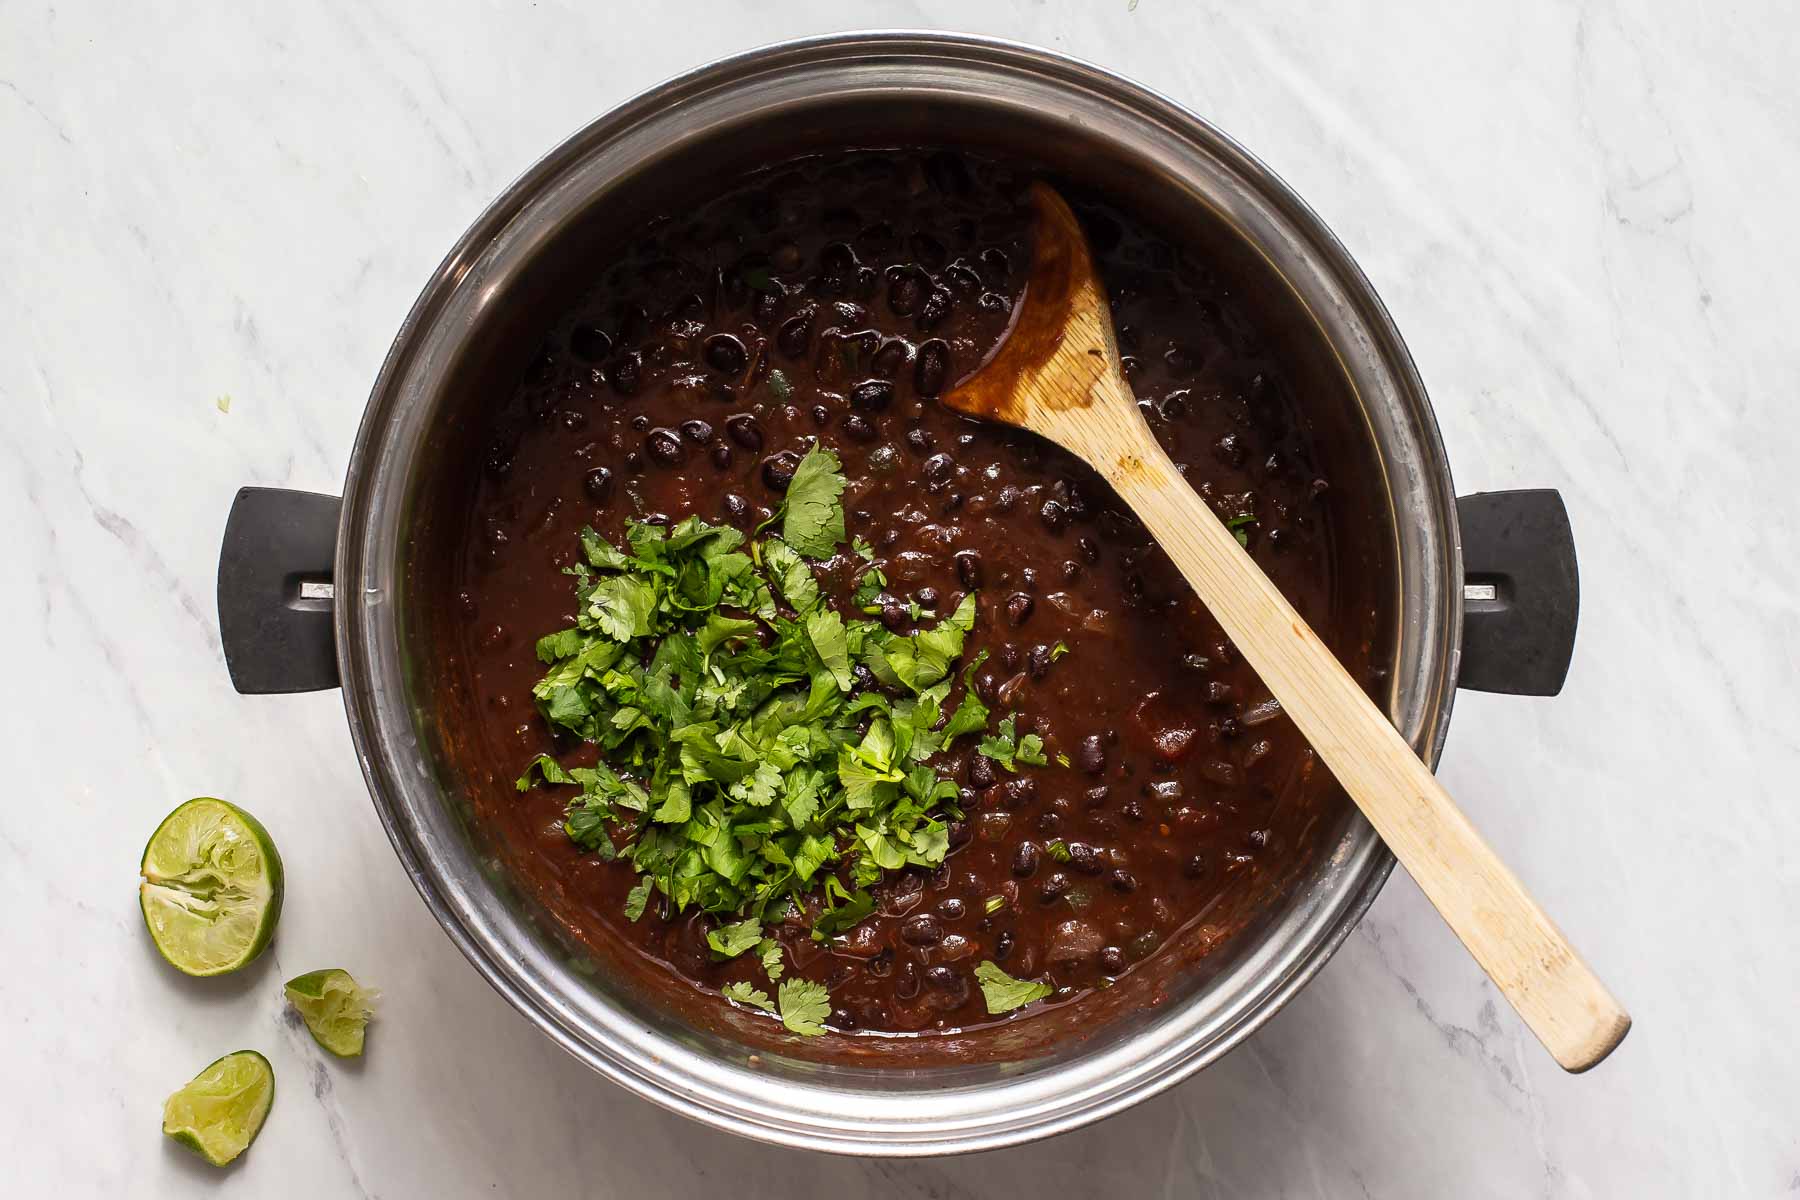 Black bean soup with fresh cilantro piled on top.